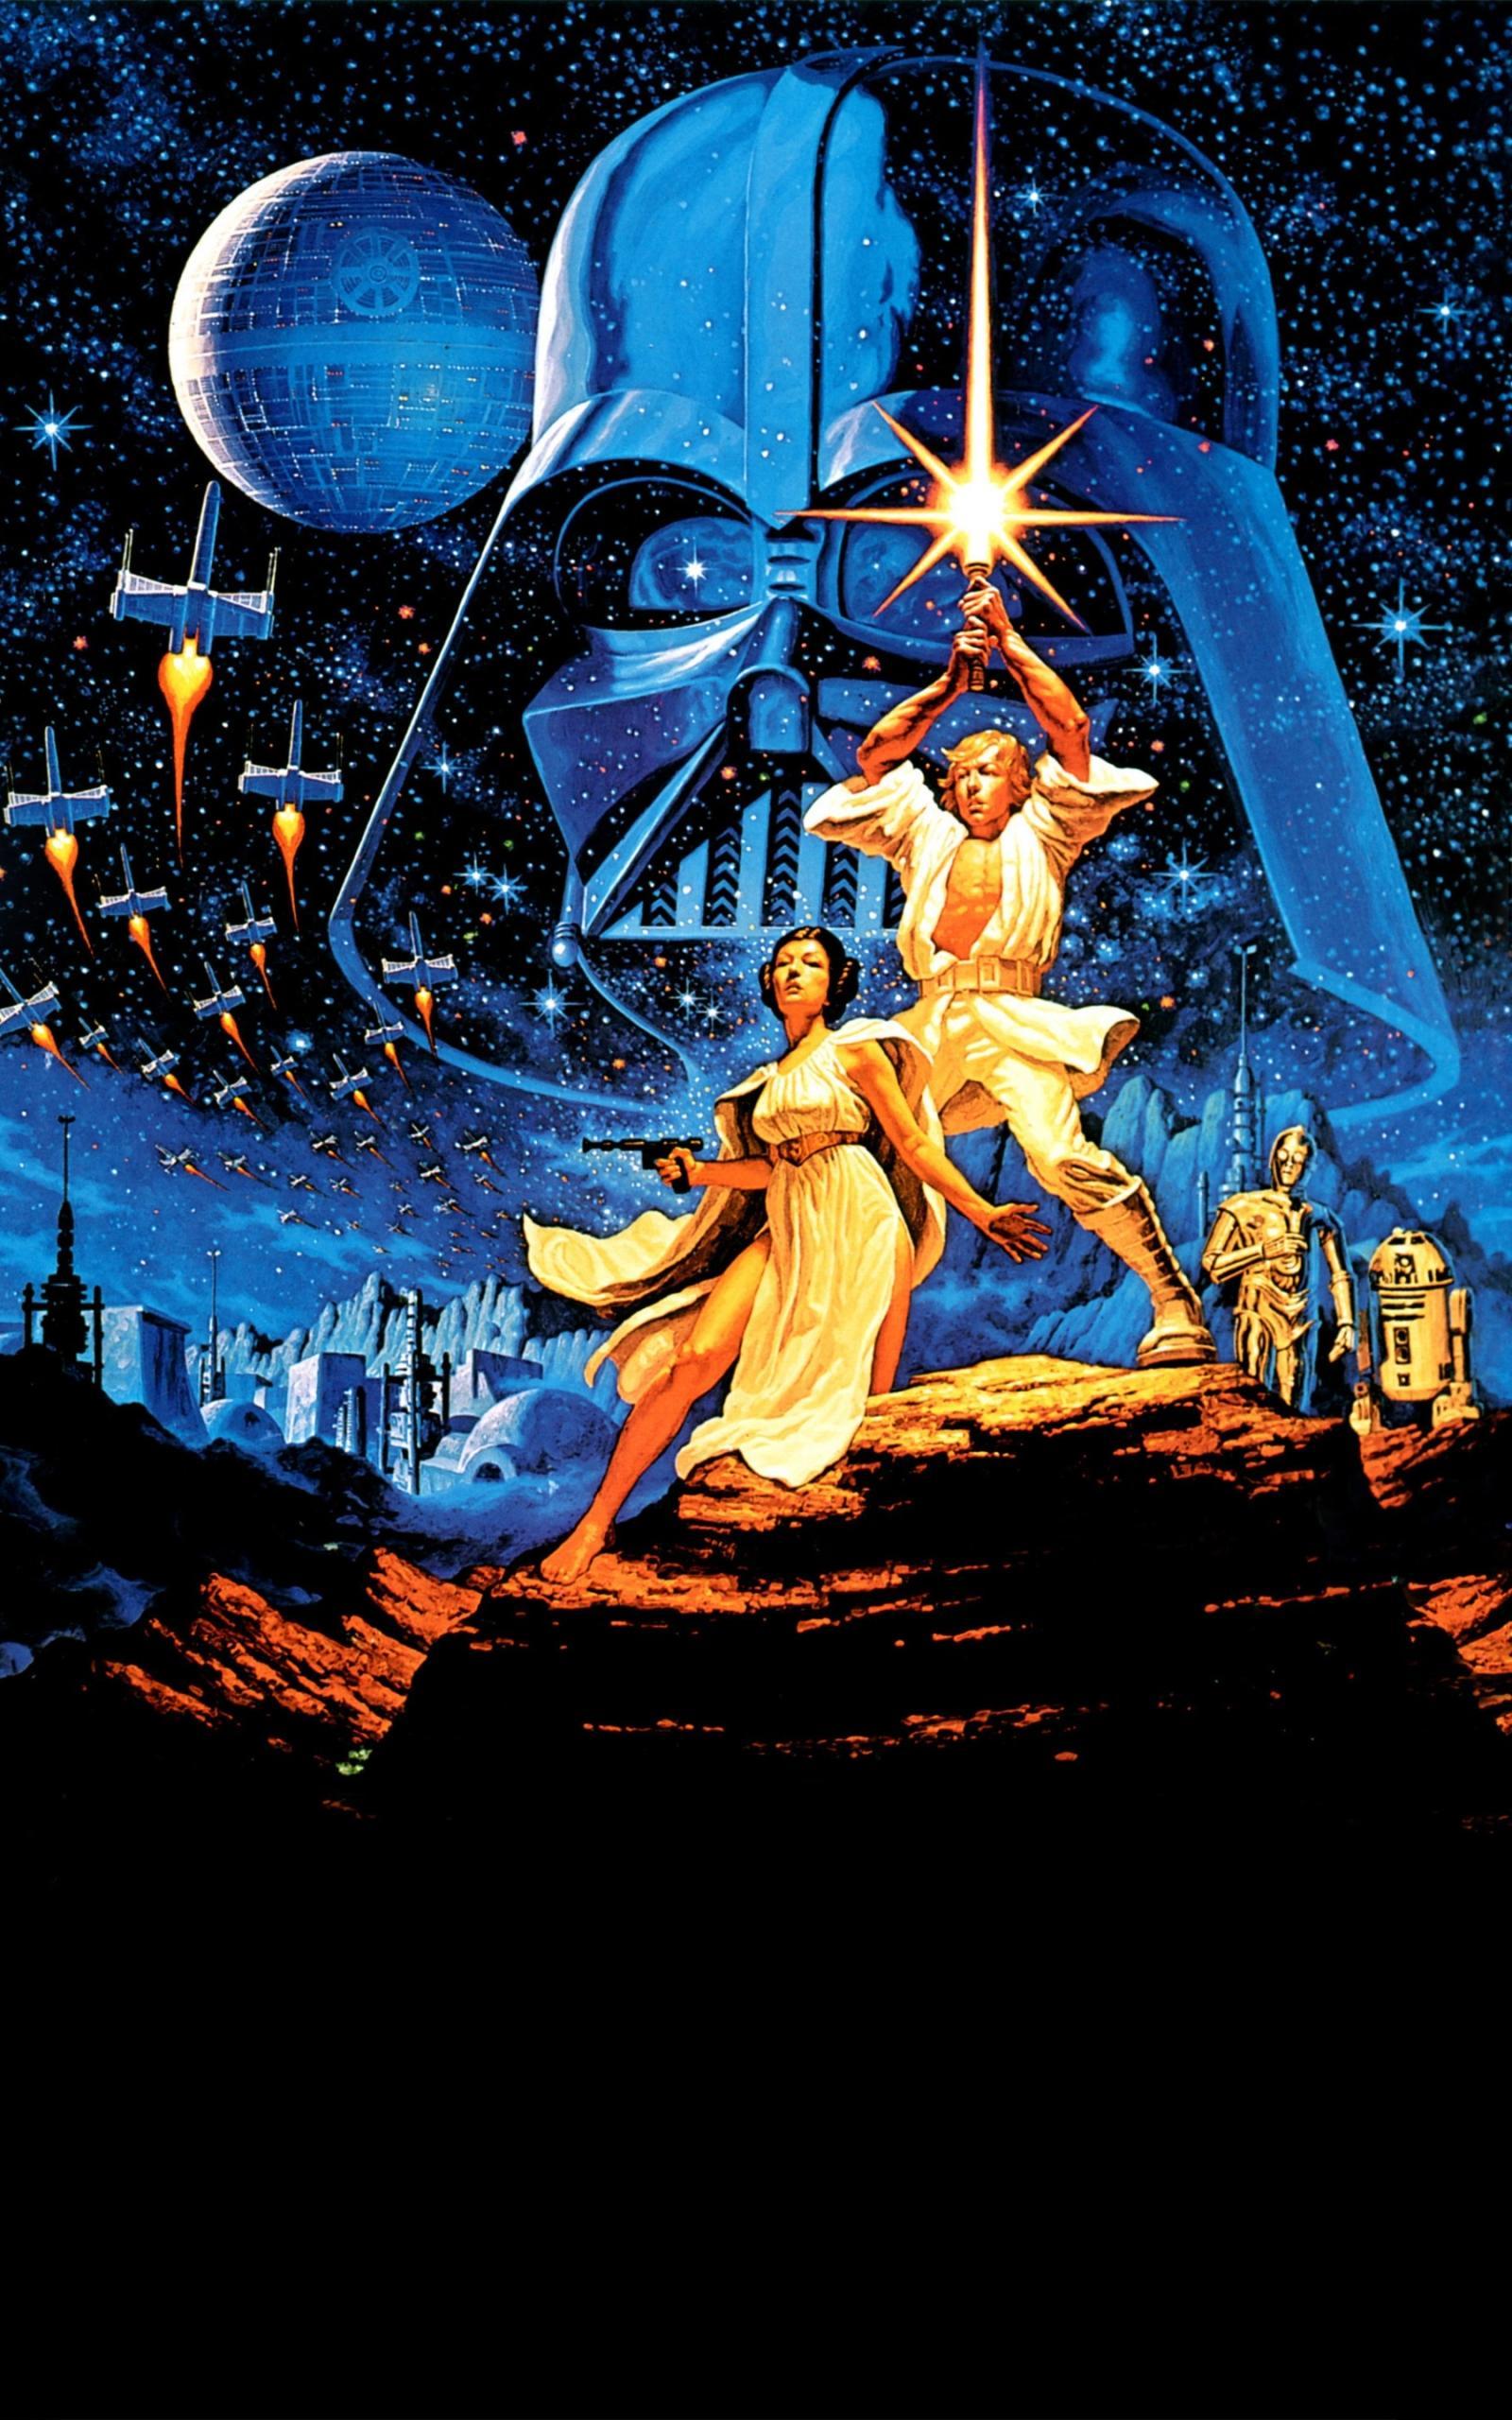 Movie Star Wars Episode IV: A New Hope (1600x2560) Wallpaper